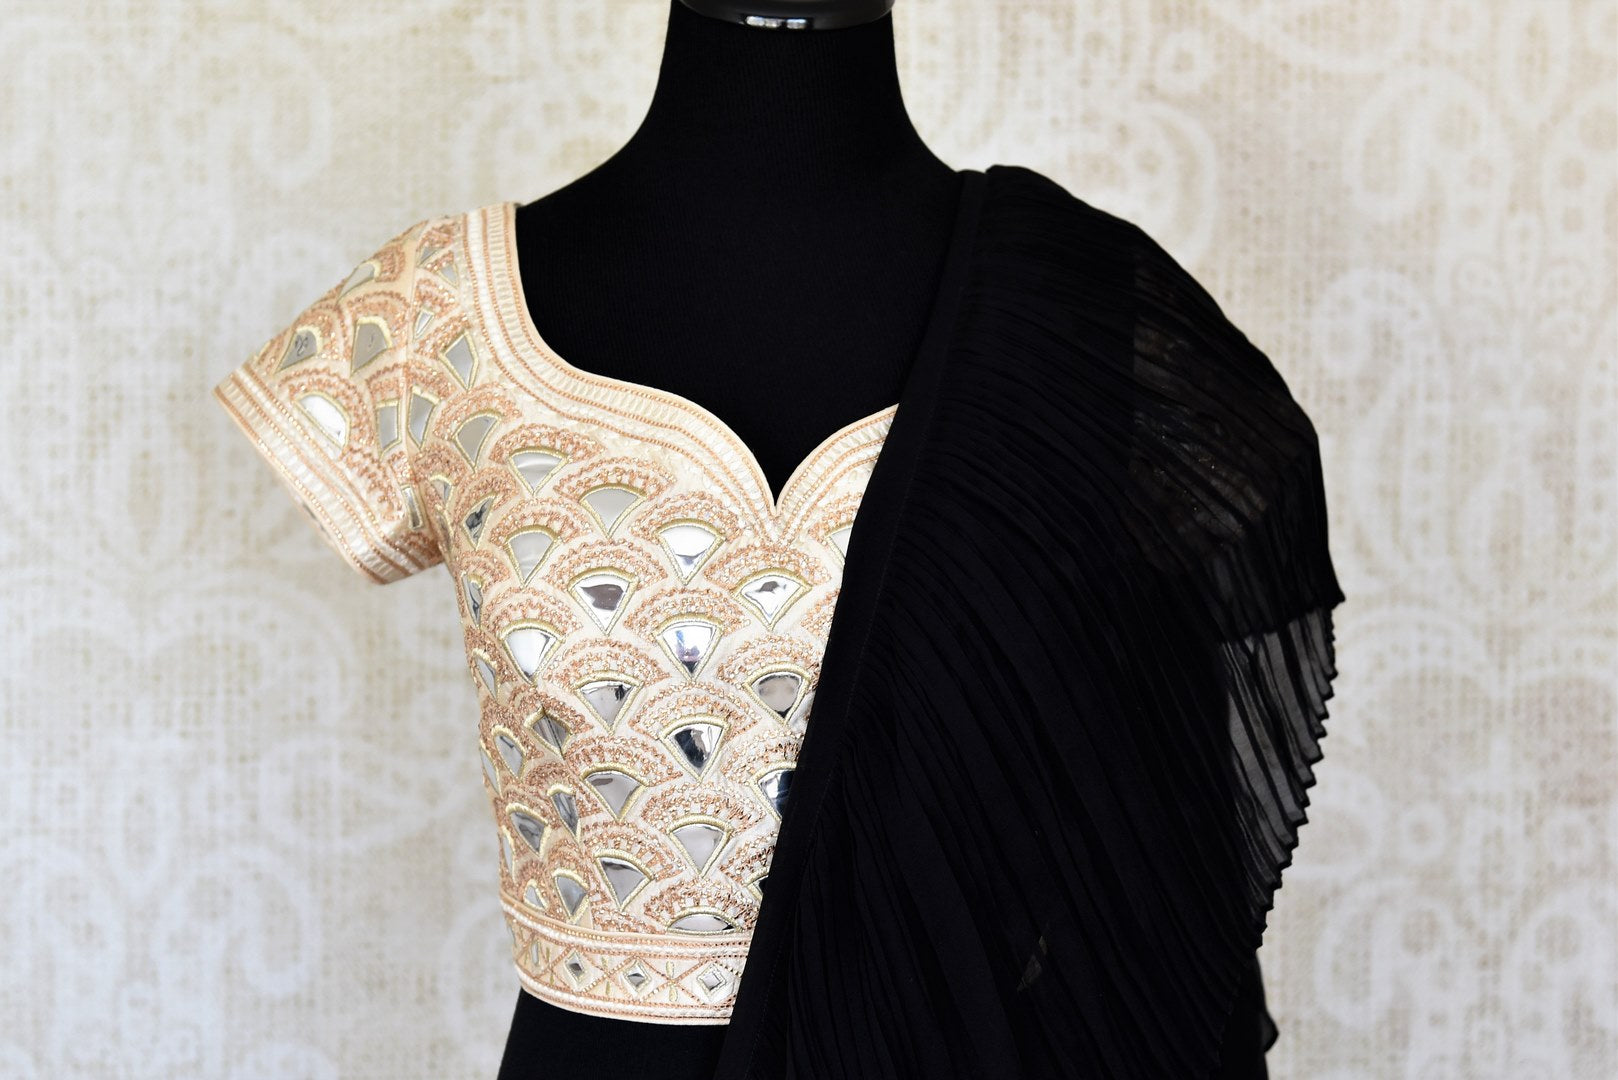 Buy black designer georgette sari with designer blouse online in USA. Enhance your ethnic look with beautiful Indian designer saris from Pure Elegance. Shop from a splendid collection of Banarasi sarees, traditional silk sarees, Kanchipuram silk sarees from our exclusive Indian clothing store in USA.-blouse pallu